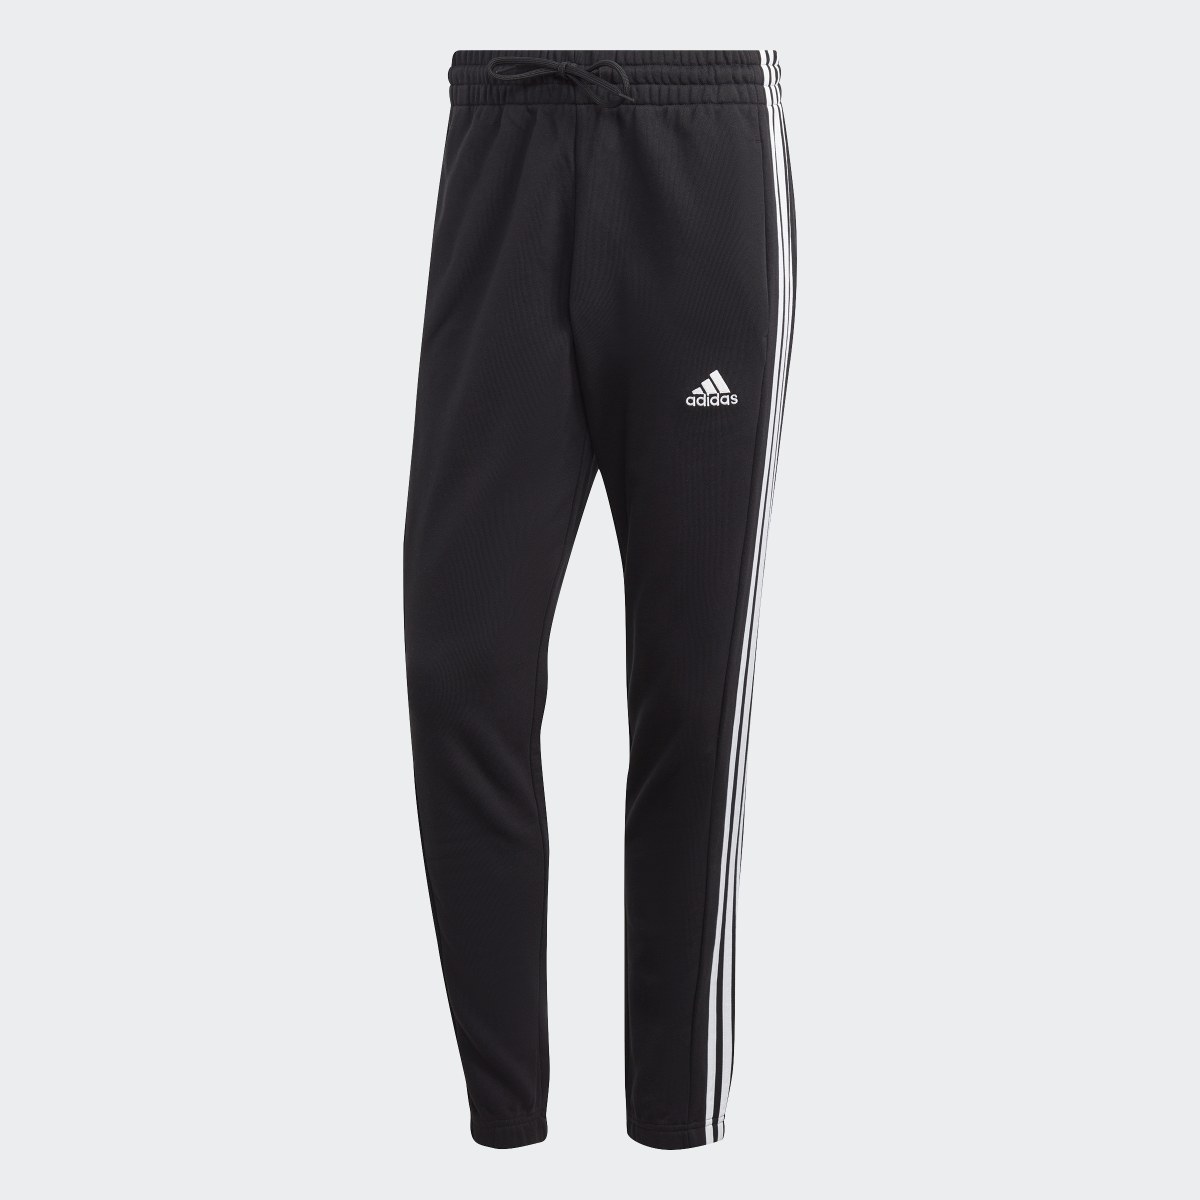 Adidas Essentials French Terry Tapered Elastic Cuff 3-Stripes Pants. 4